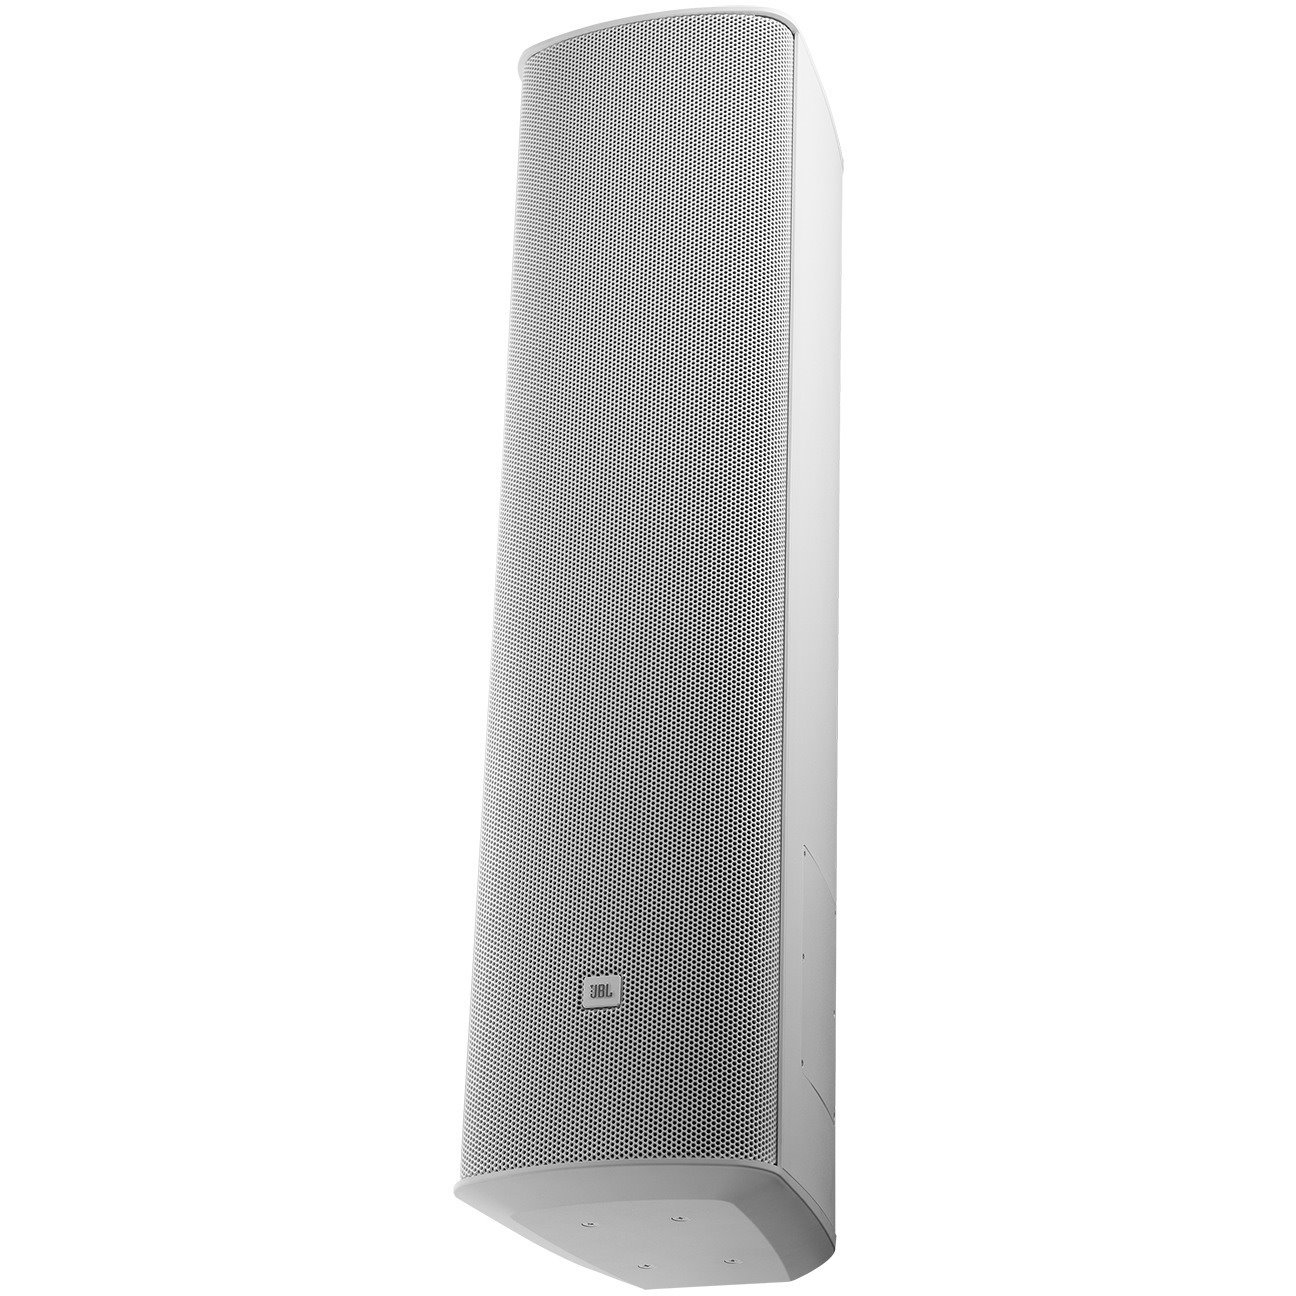 JBL Professional Line Array CBT 1000E Outdoor Wall Mountable Speaker - 1500 W RMS - White